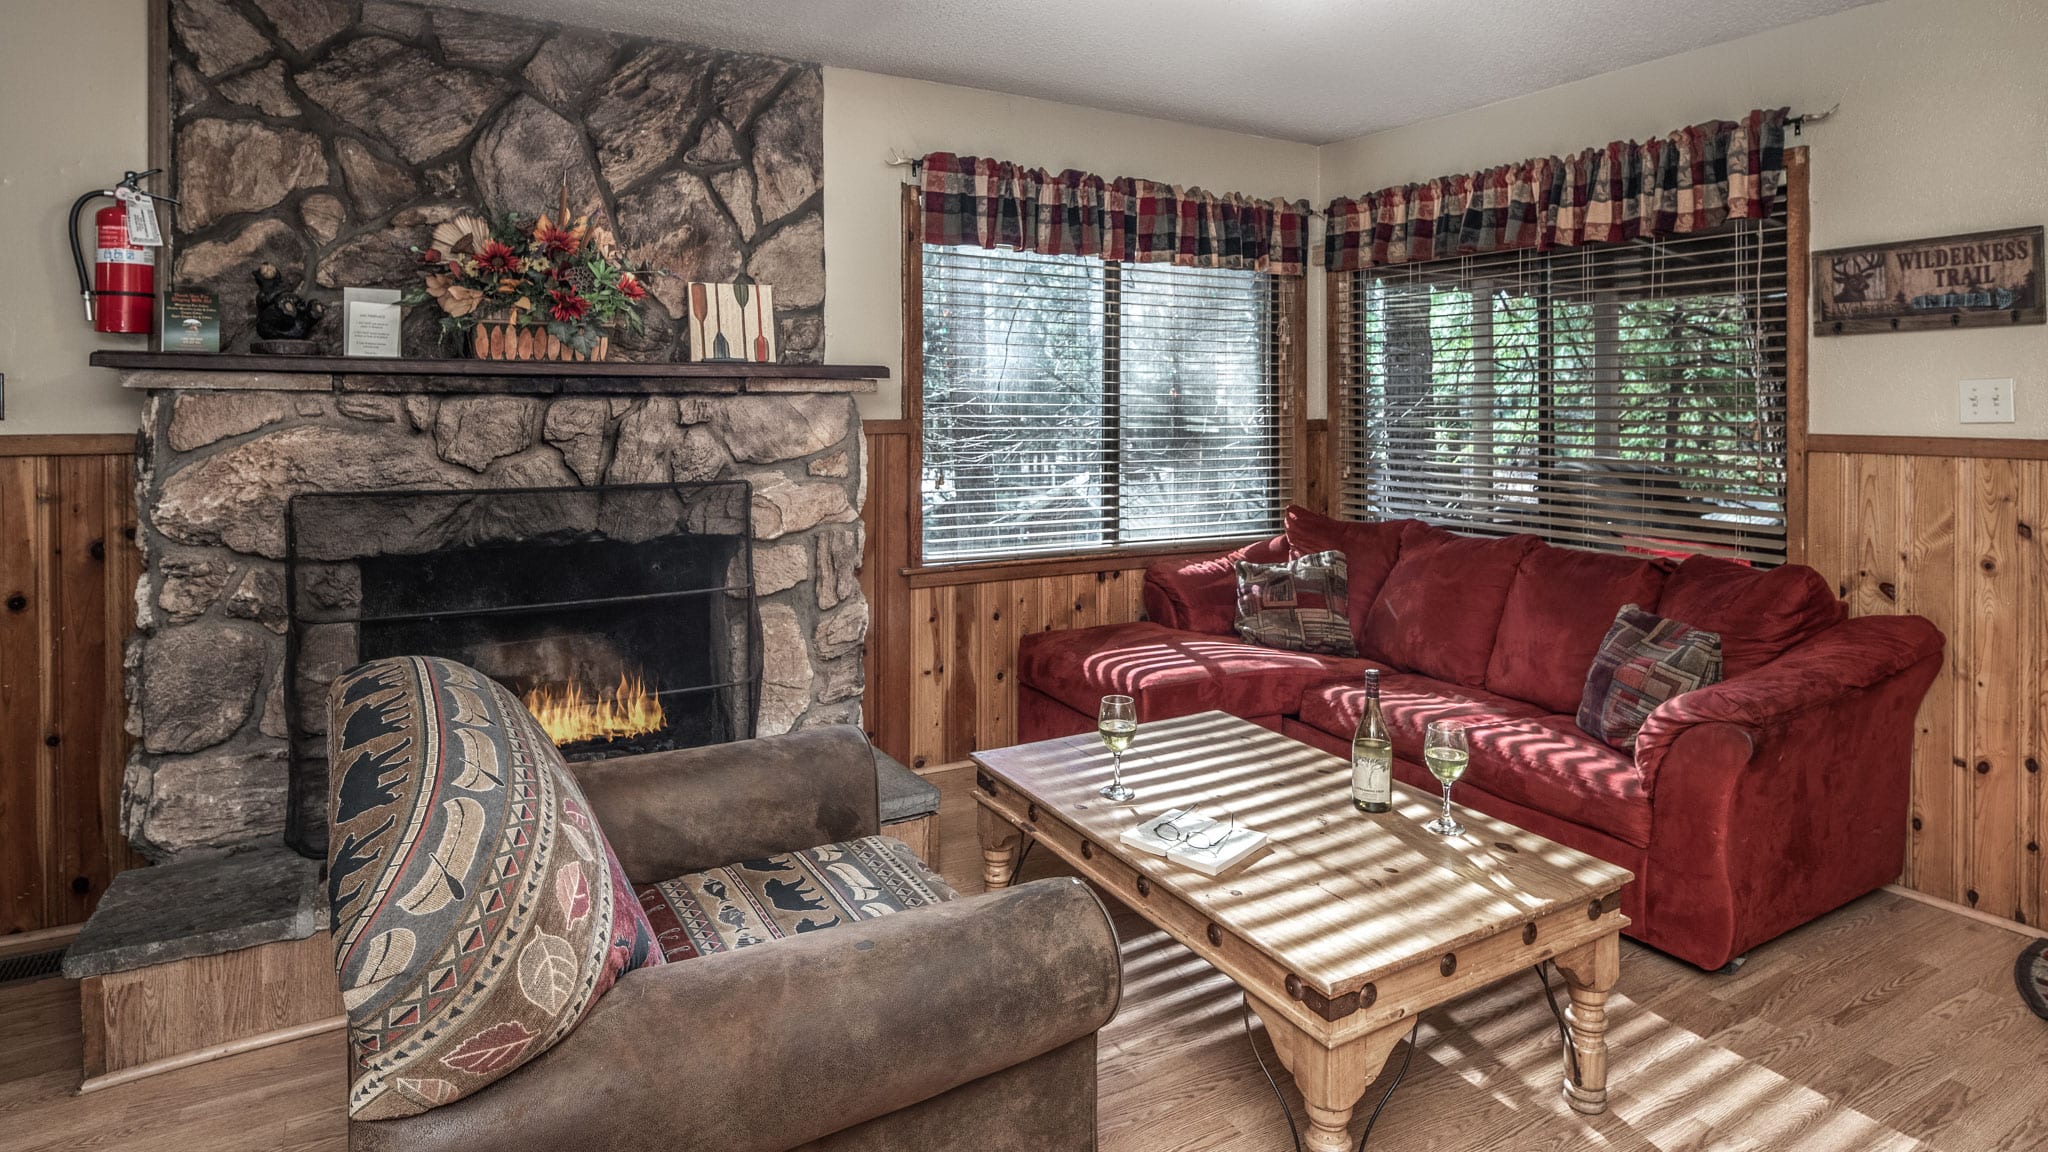 Two couches next to a stone fireplace.